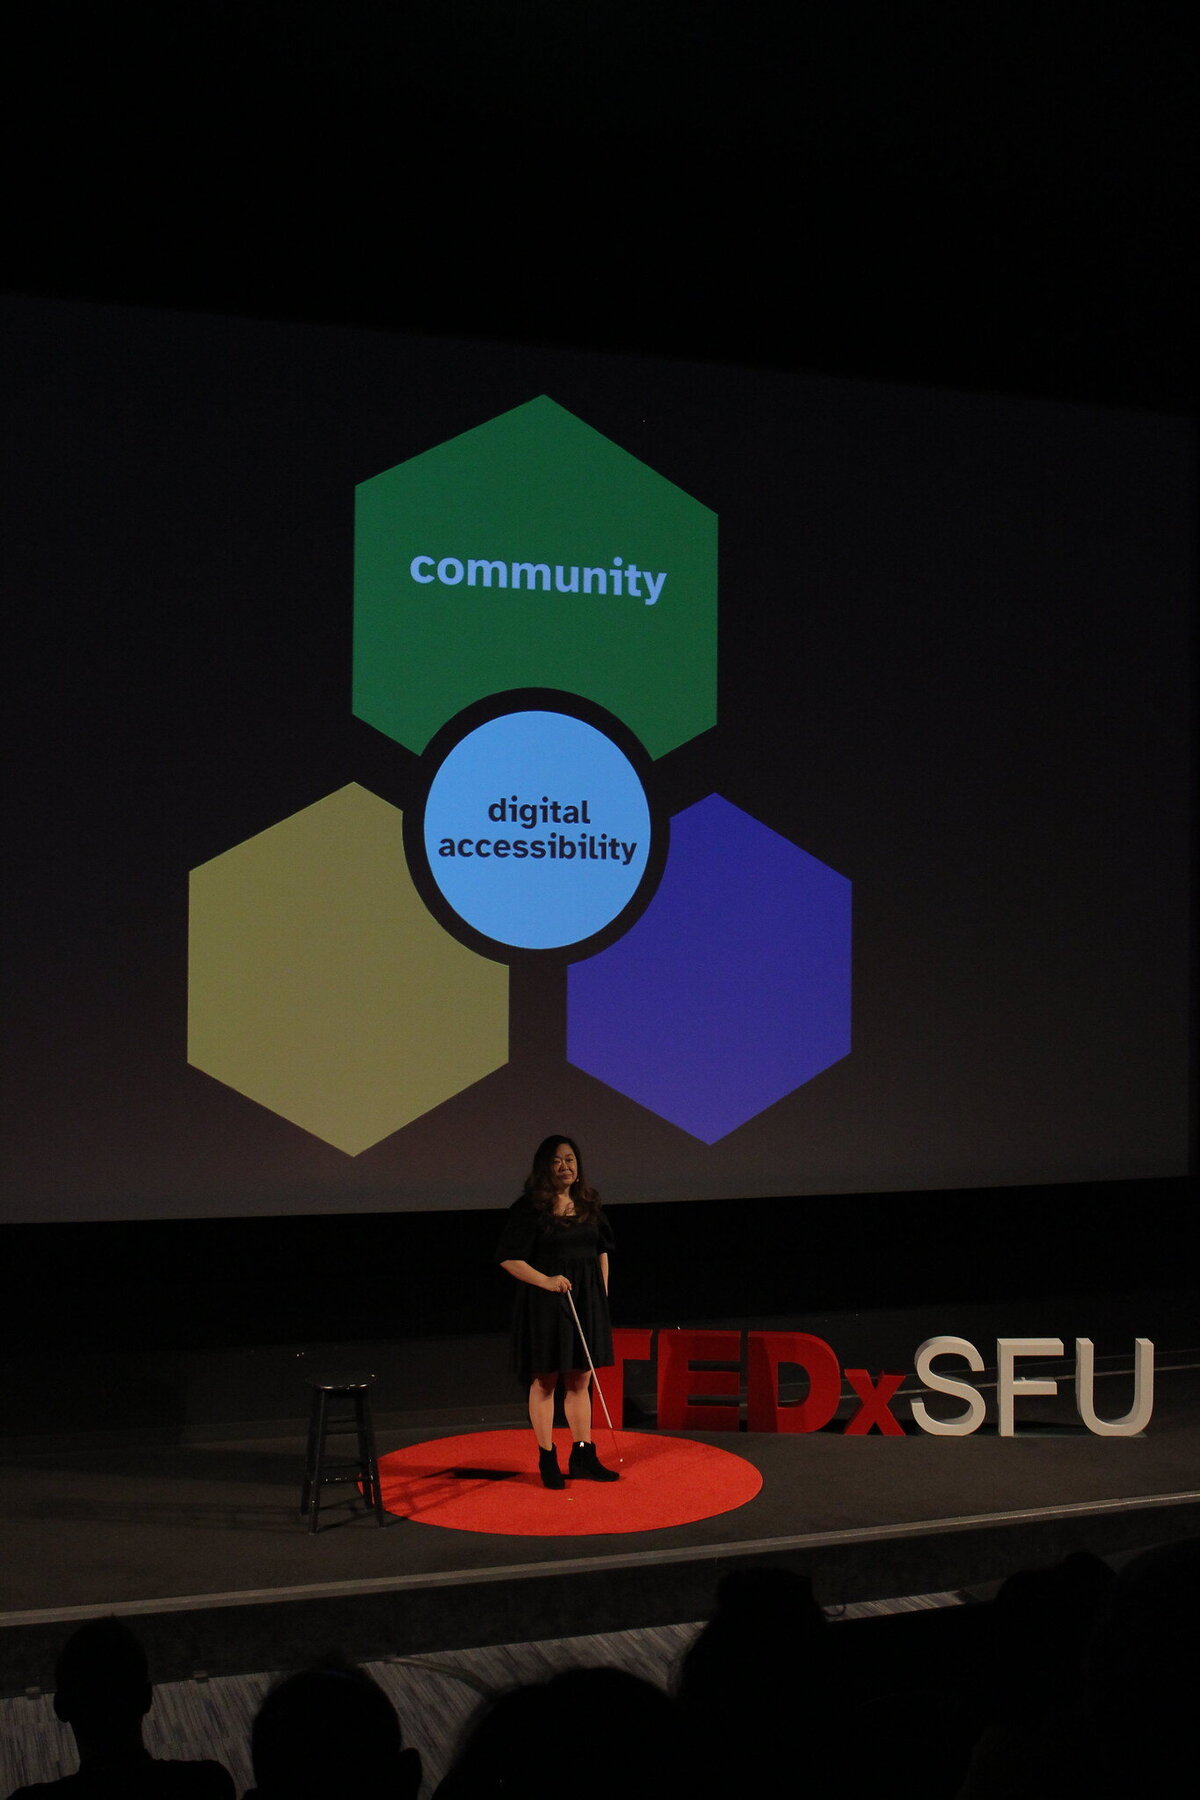 Anne stands with her white cane on the TEDxSFU stage with a graphic with the words "digital accessibility" and community"